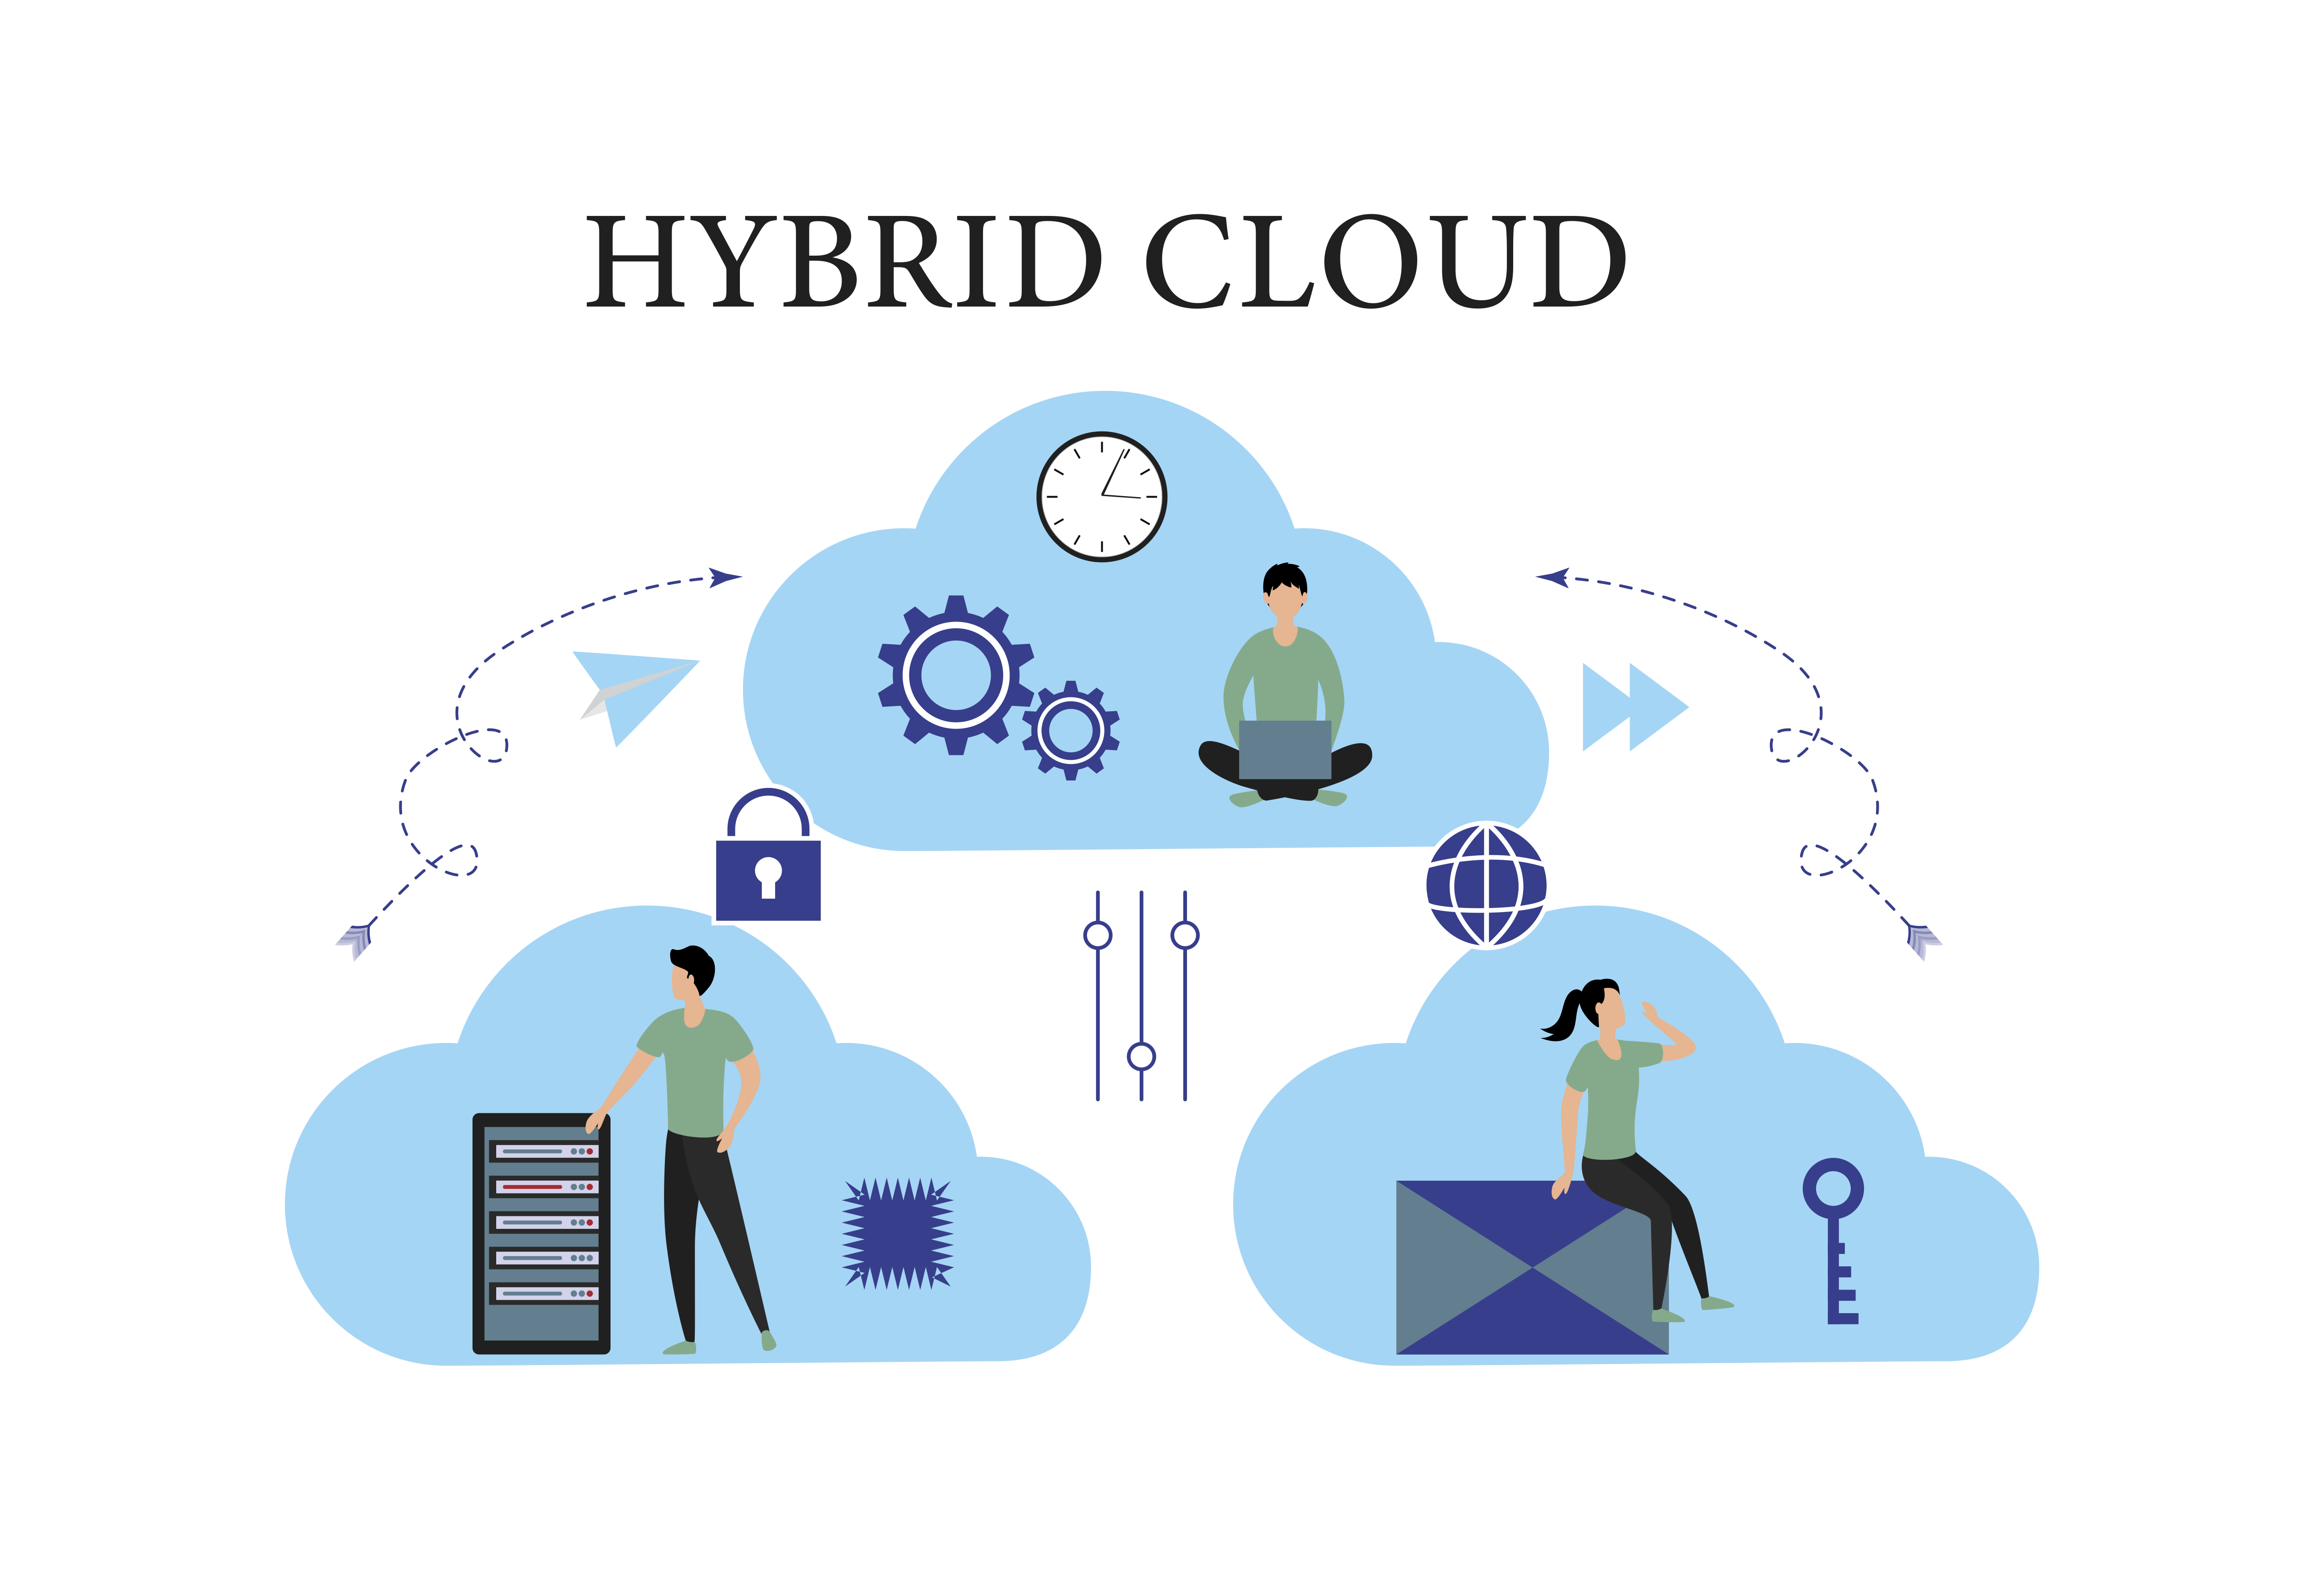 Cloud consulting services